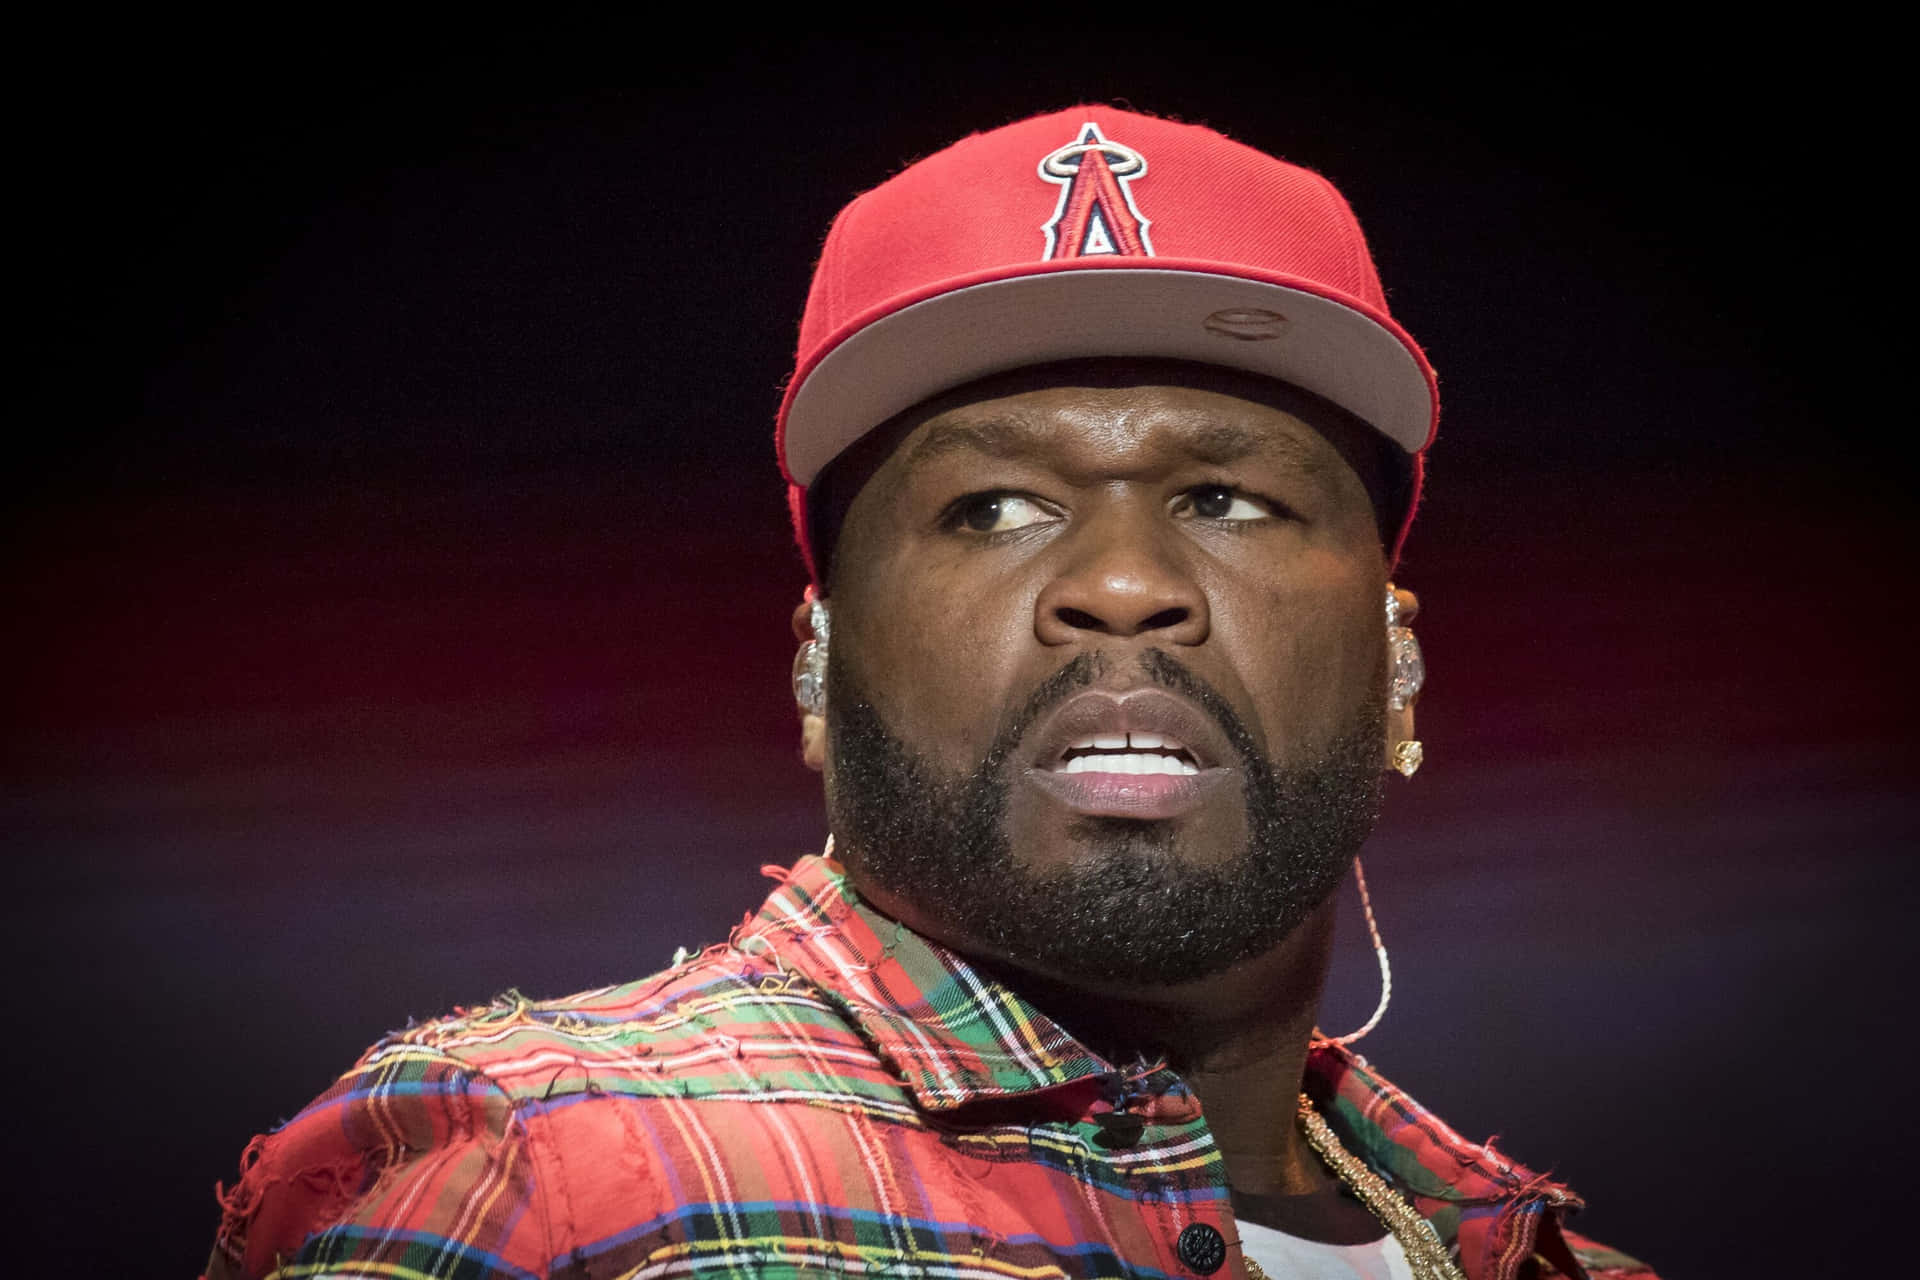 Download 50 Cent attends the BANGLADESH Music Festival | Wallpapers.com